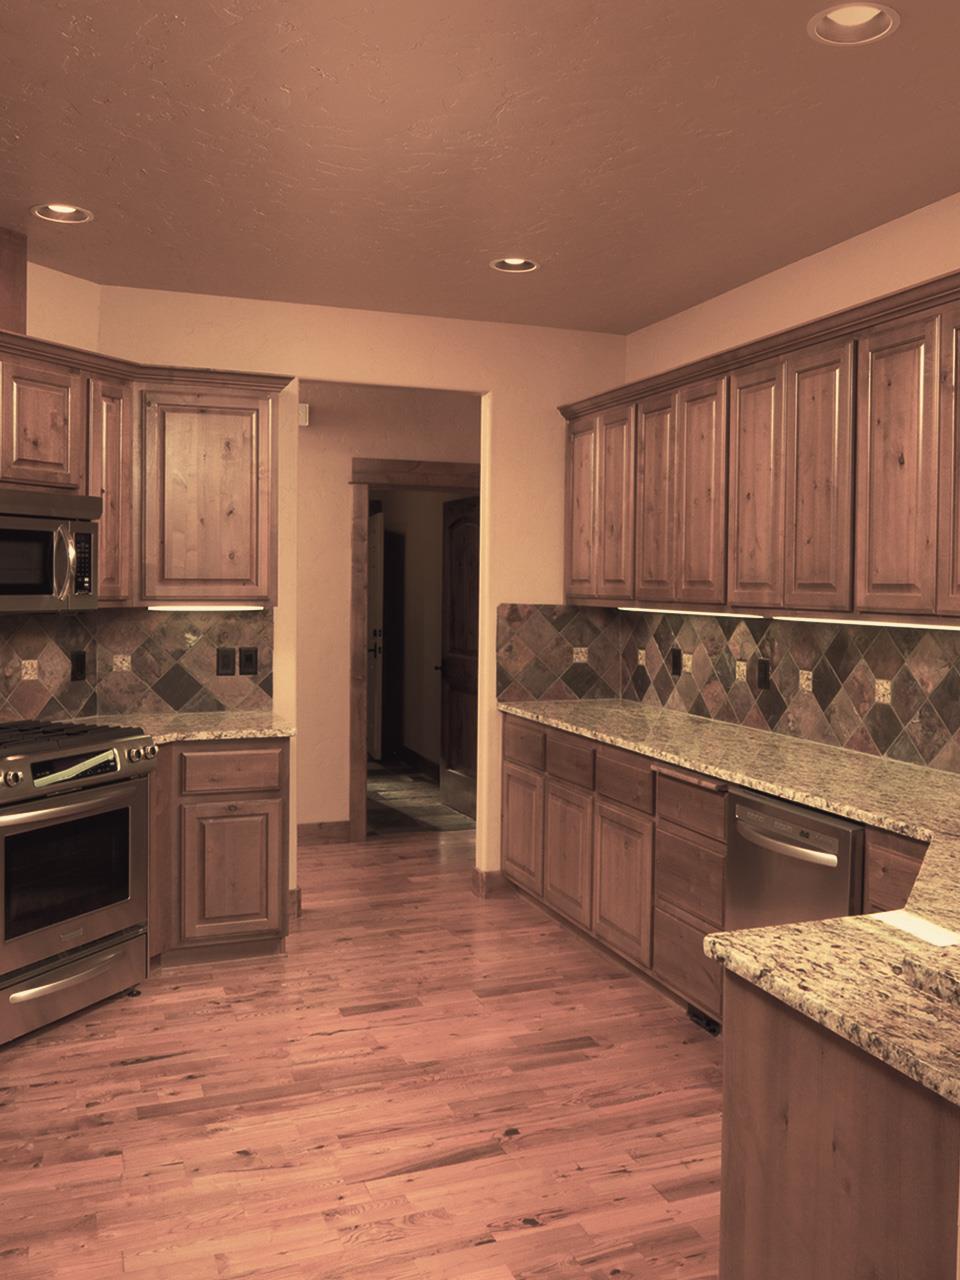 How To Buy Cheap Kitchen Cabinets